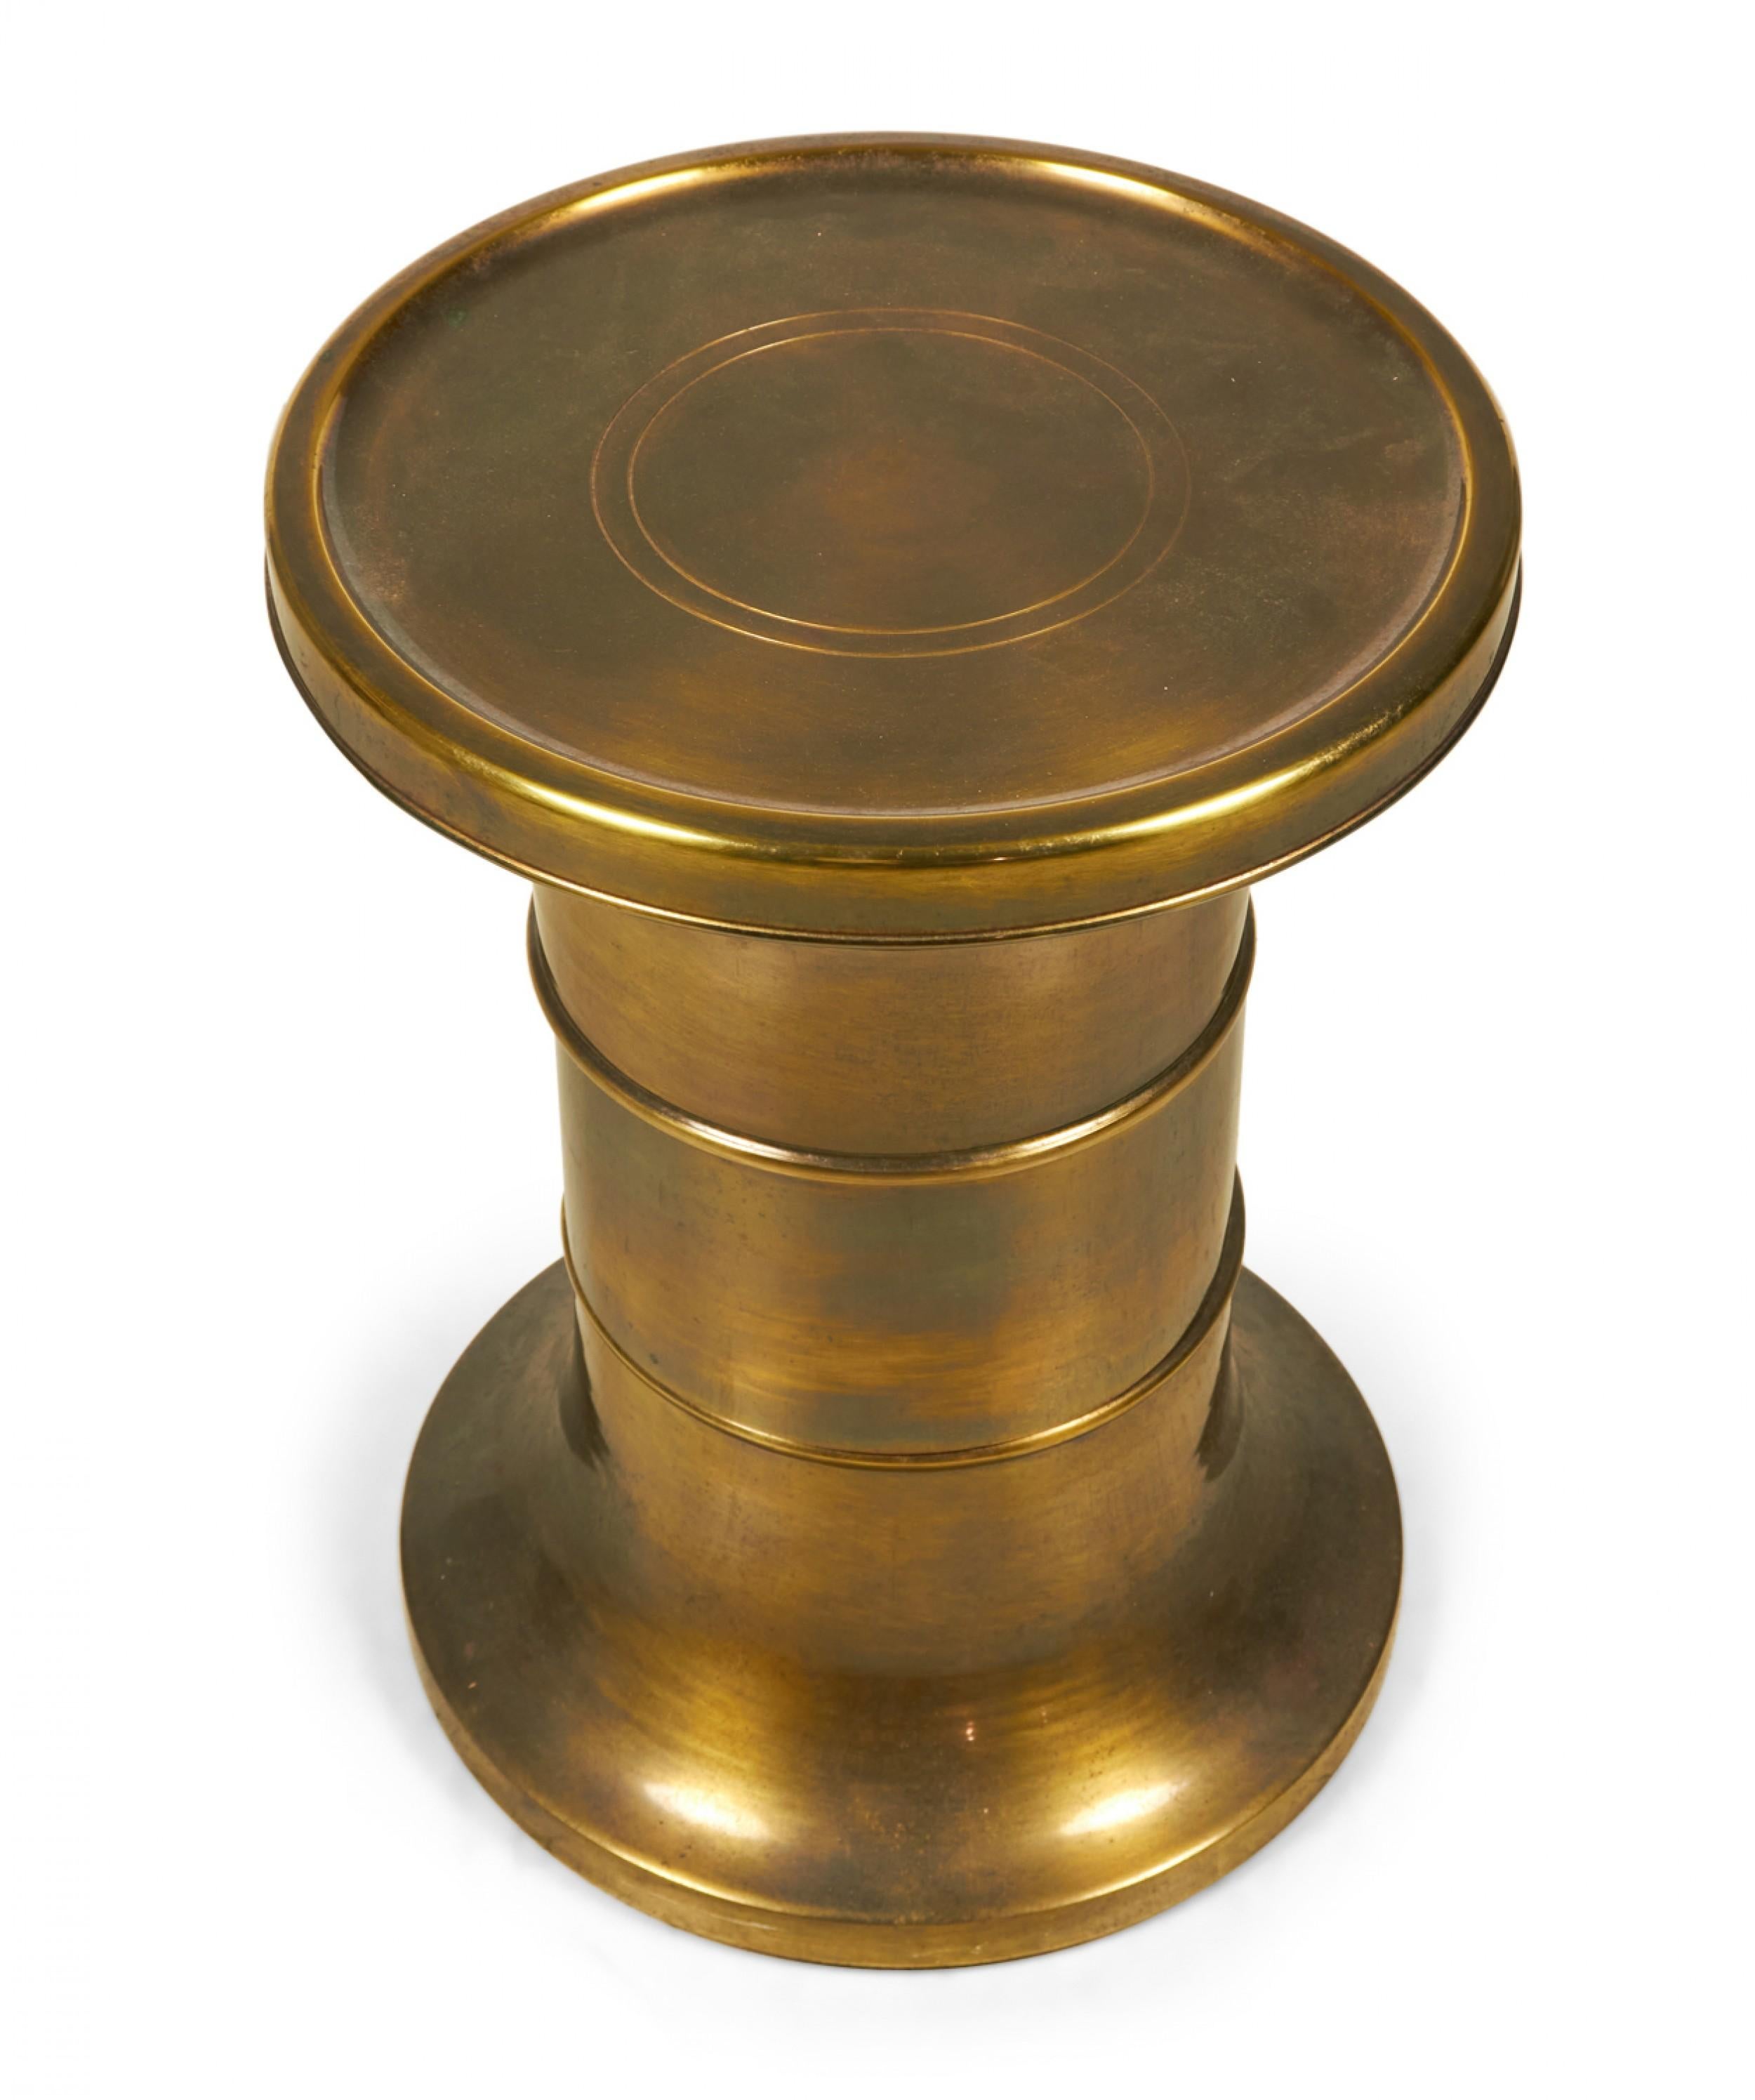 American mid-century (1970s) drum-style brass pedestal / side table with a flared top and bottom and two decorative ridges around the post and a lacquered finish. (Mastercraft / William Doezema).